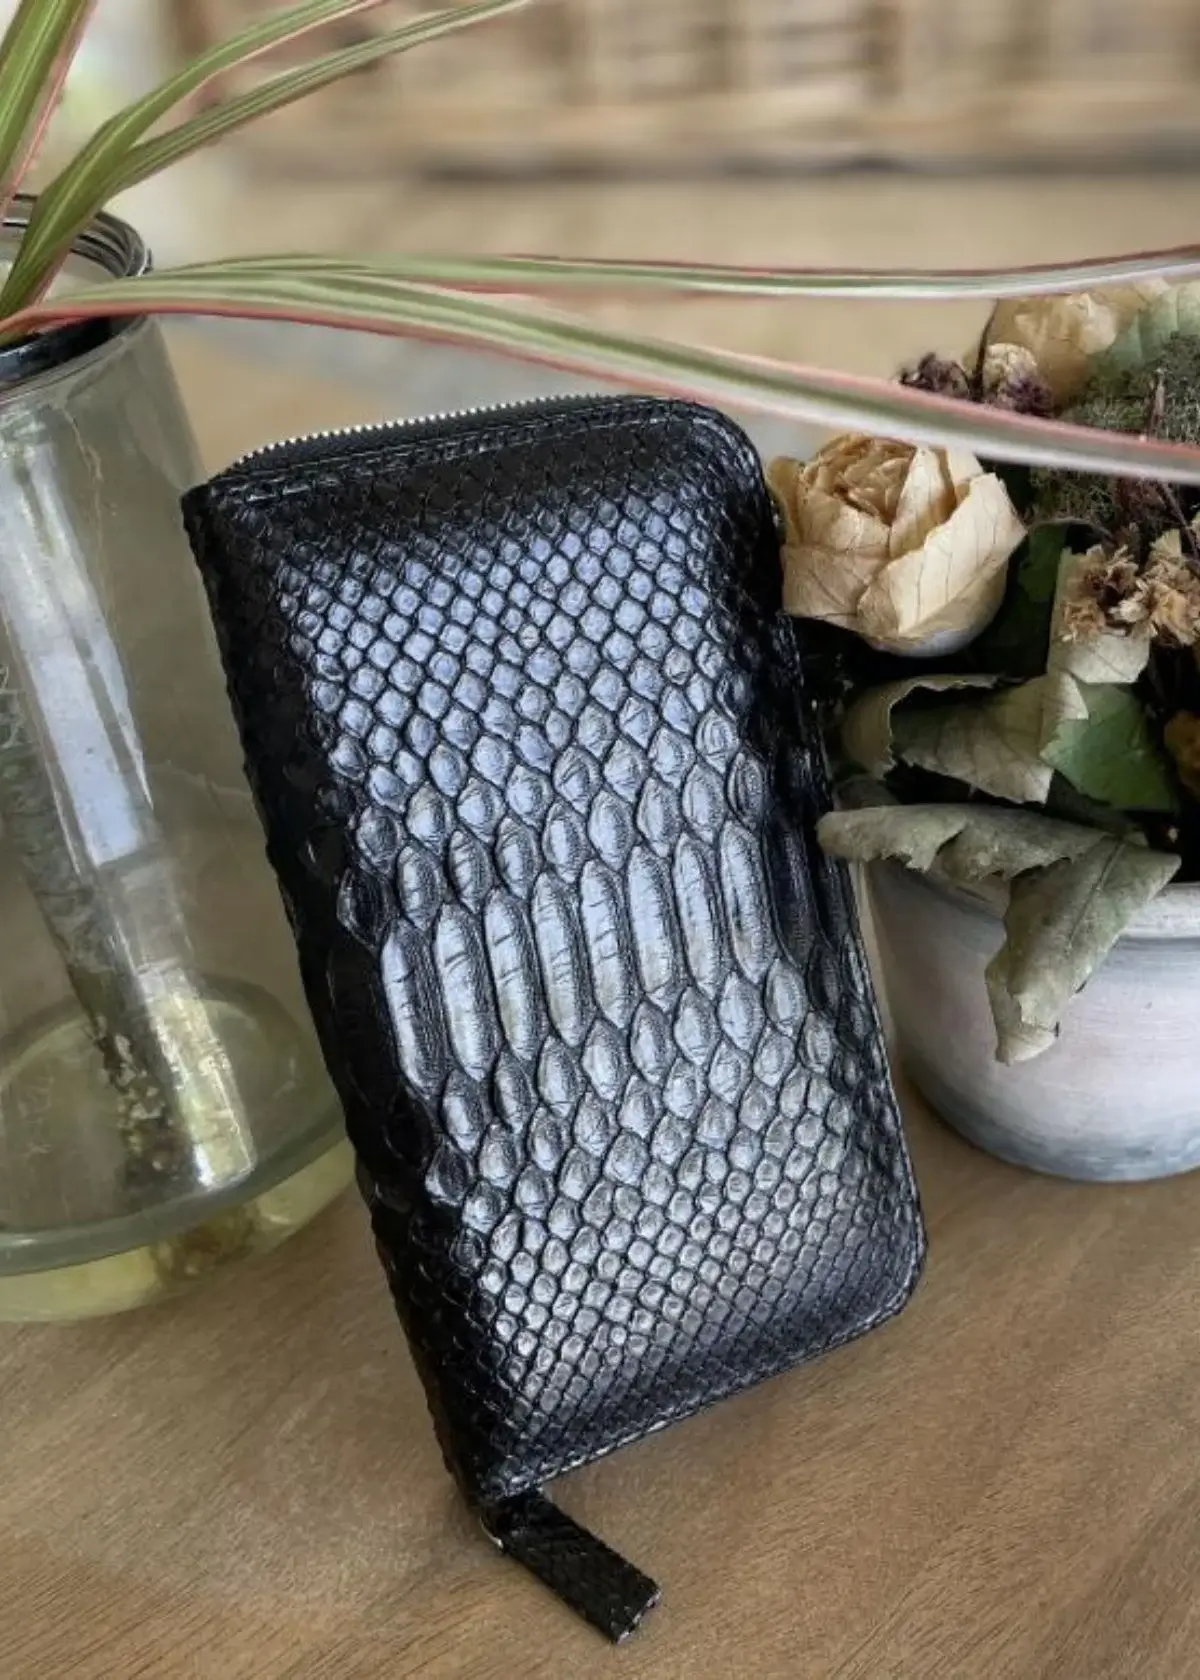 How do I Clean my Snake Skin Wallet?